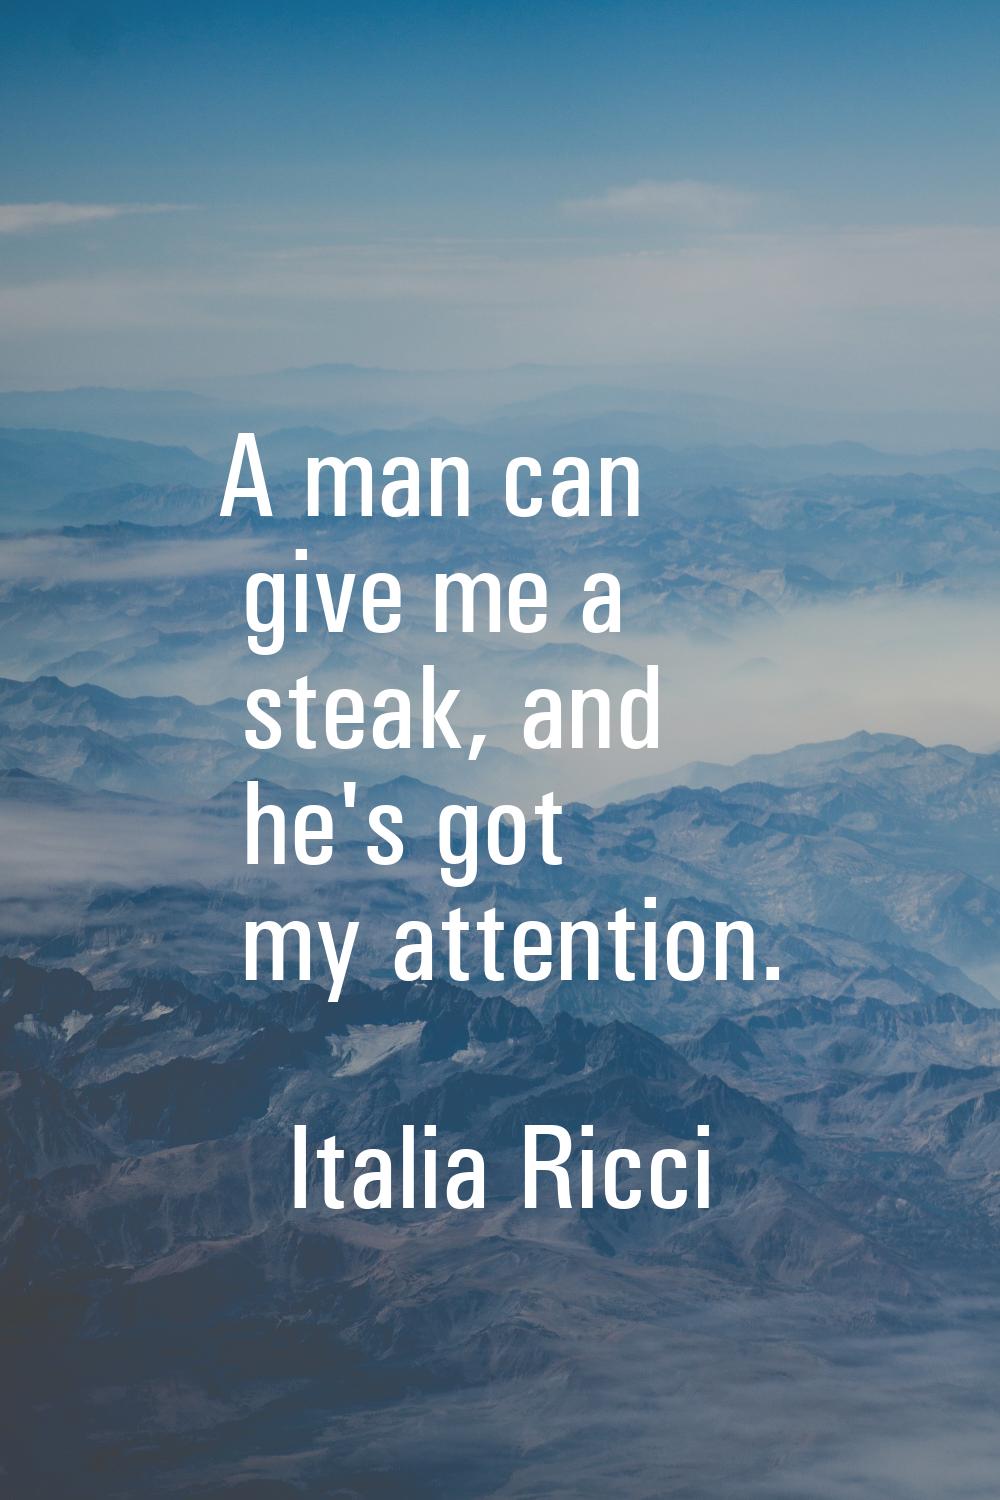 A man can give me a steak, and he's got my attention.